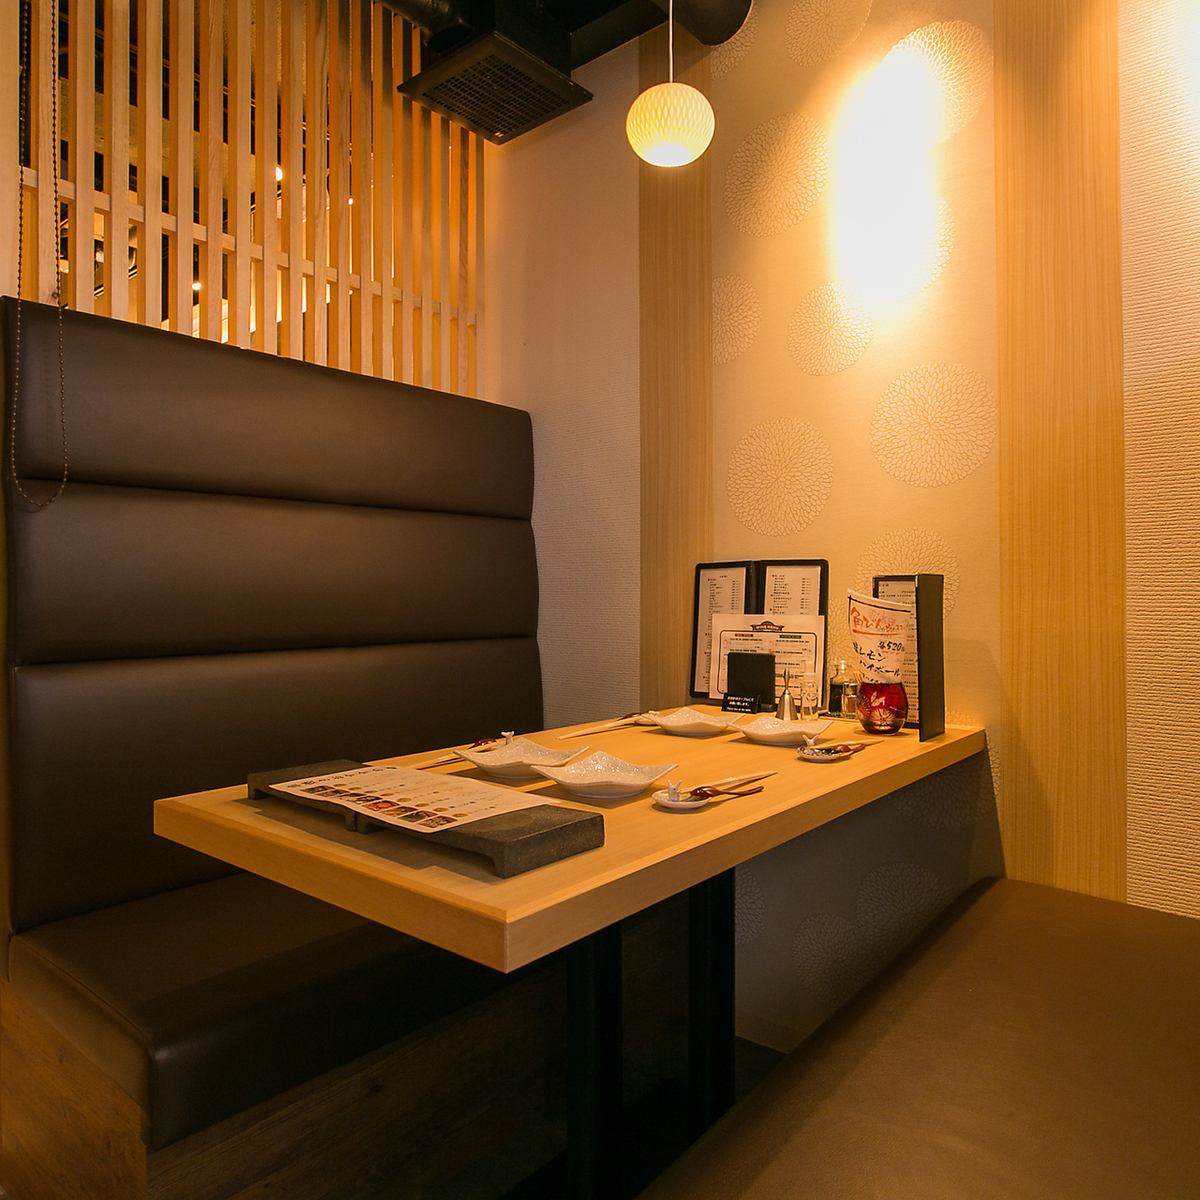 Semi-private rooms in private spaces are also available ★ For dining with loved ones!